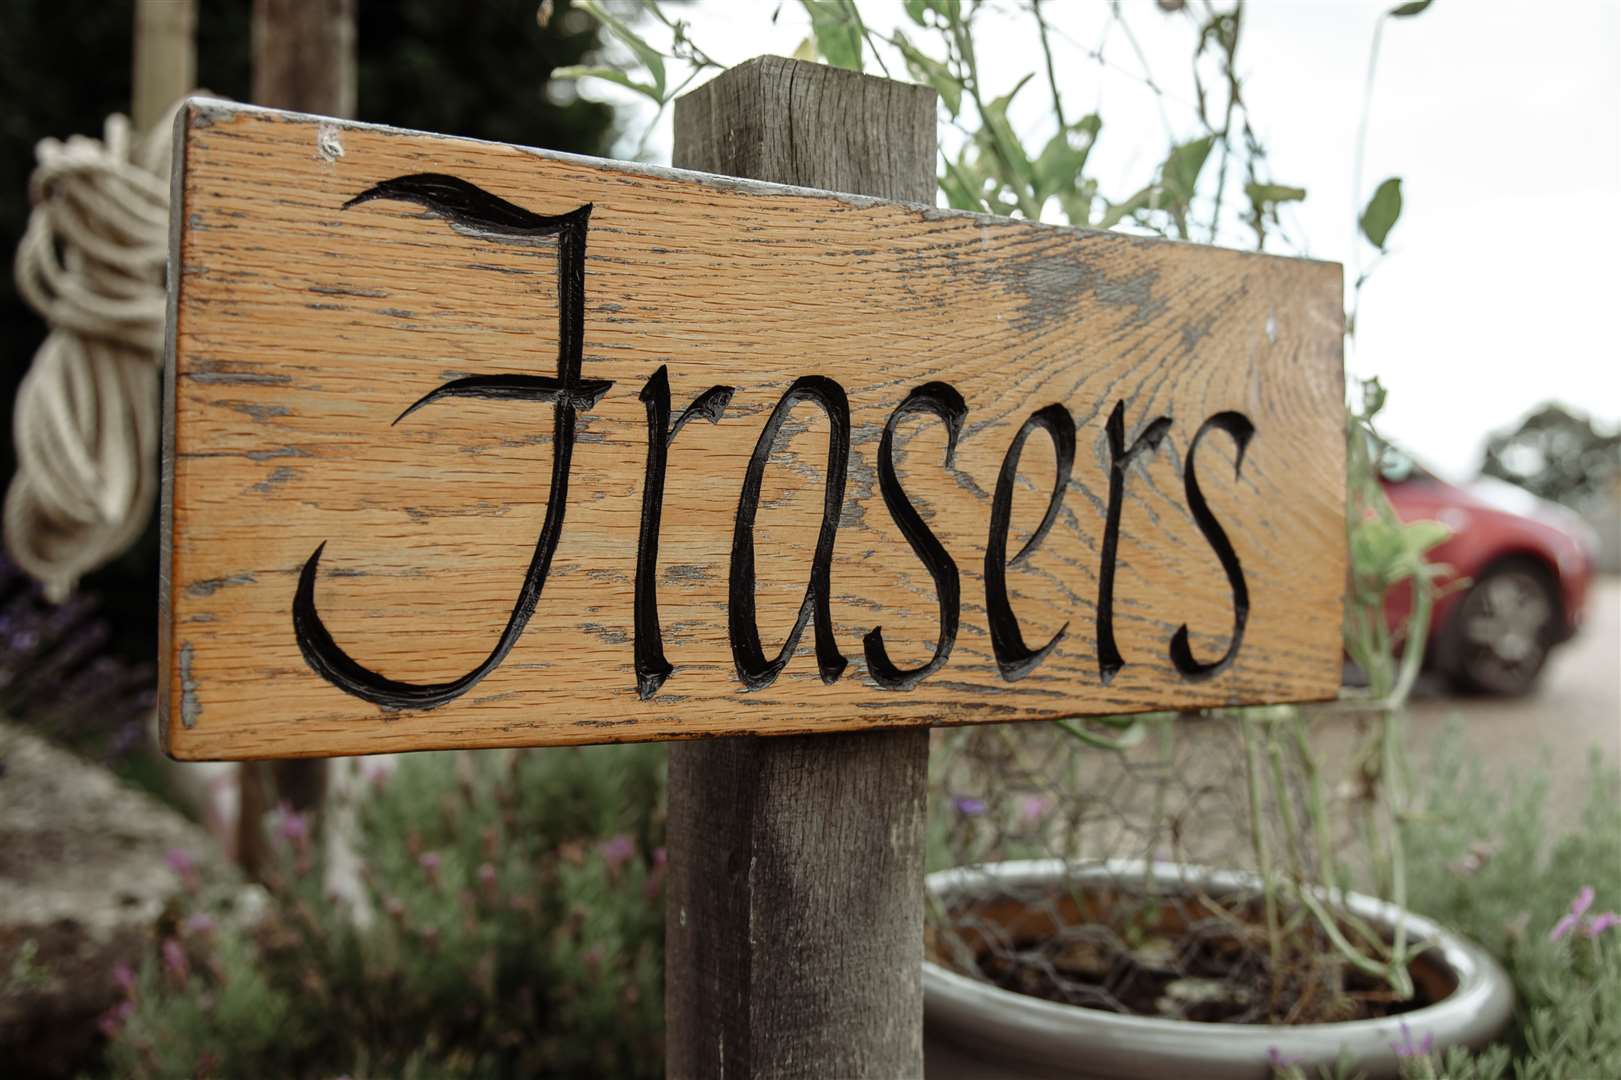 Frasers is off the beaten track